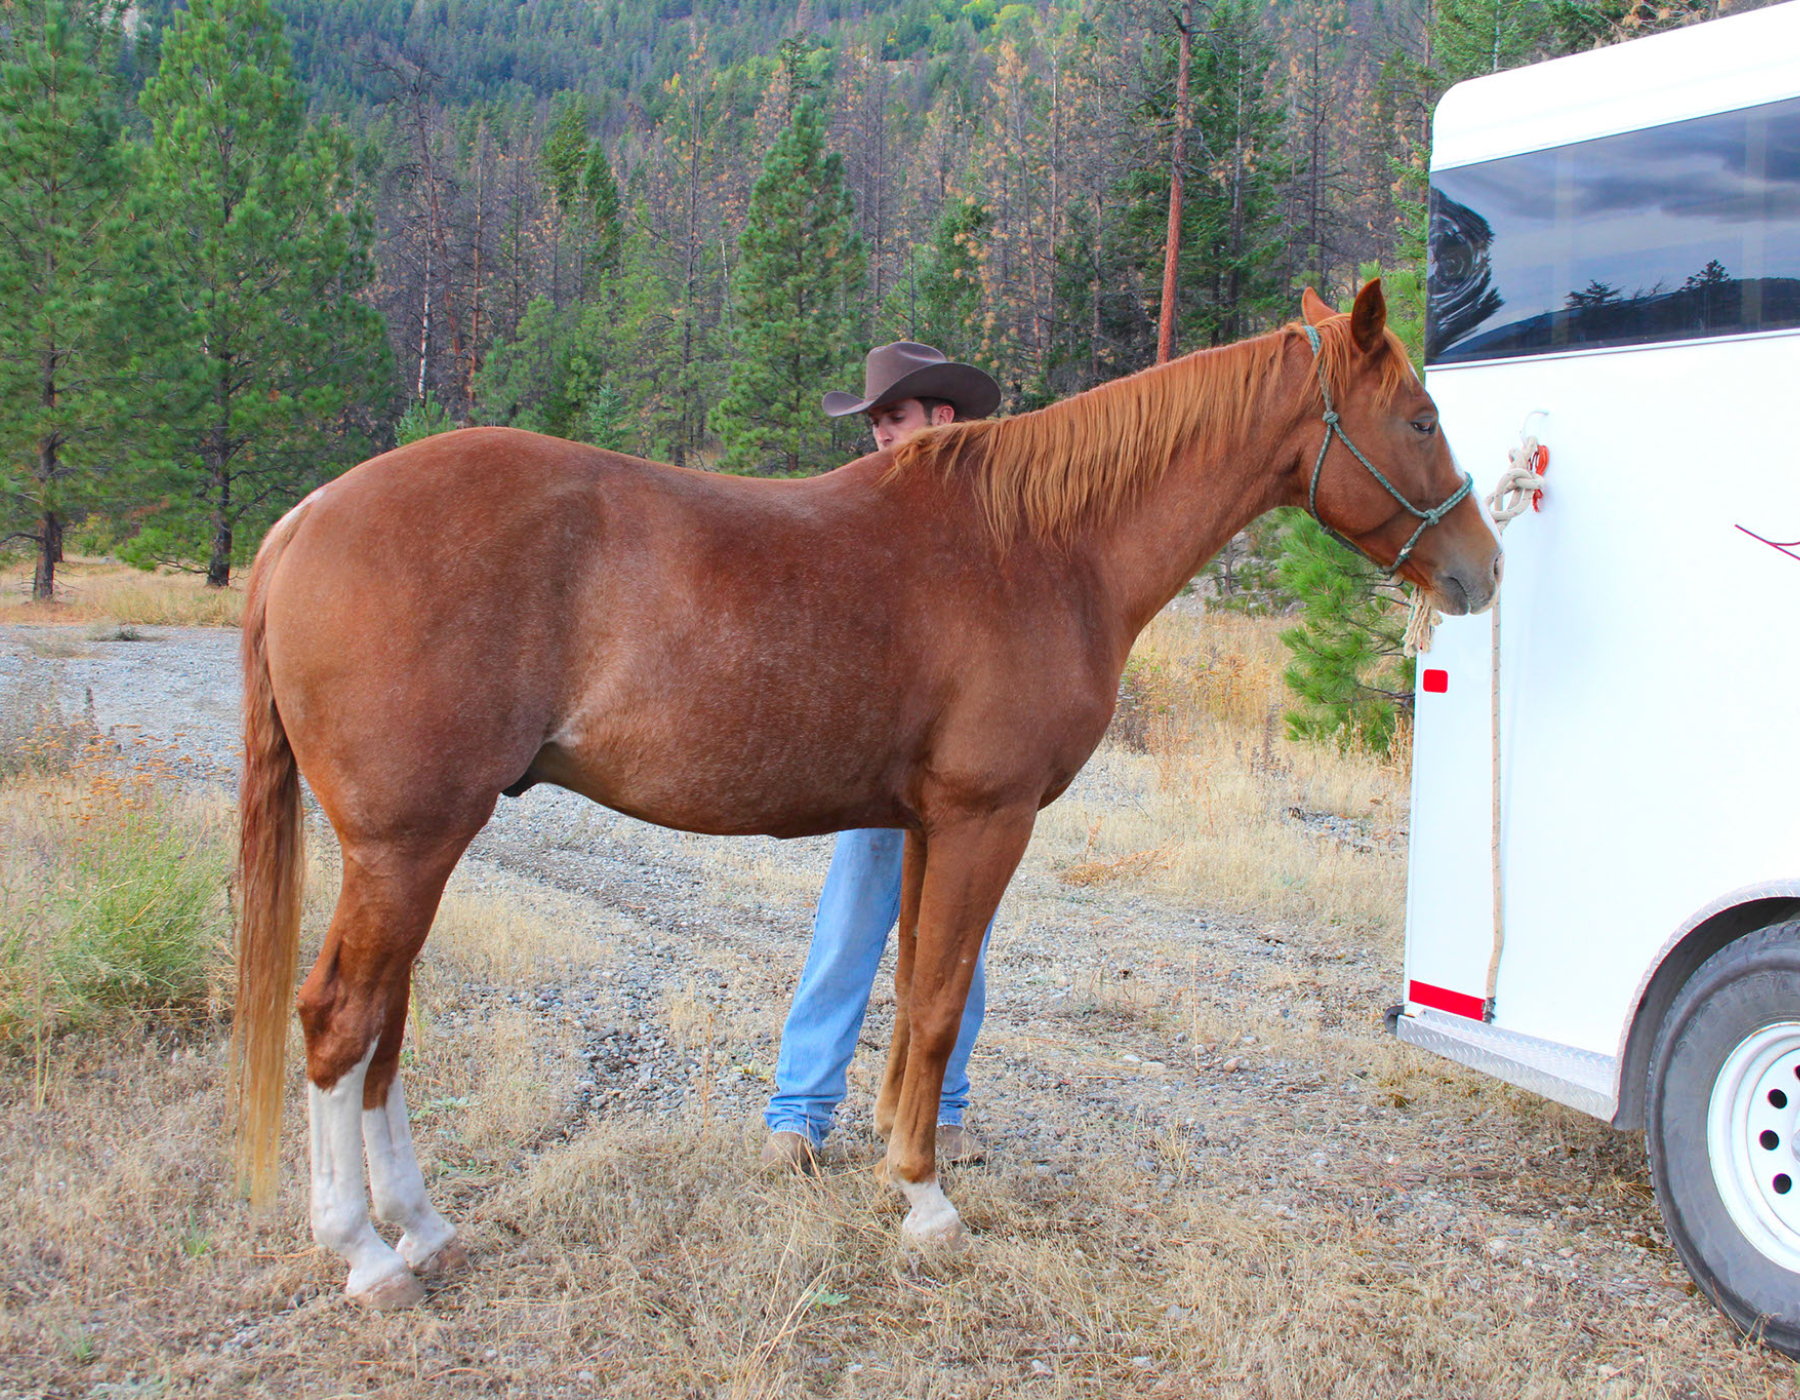 A horse and handler stand next to a horse trailer, this horse appears calm because it likely has not experienced trailer trauma.